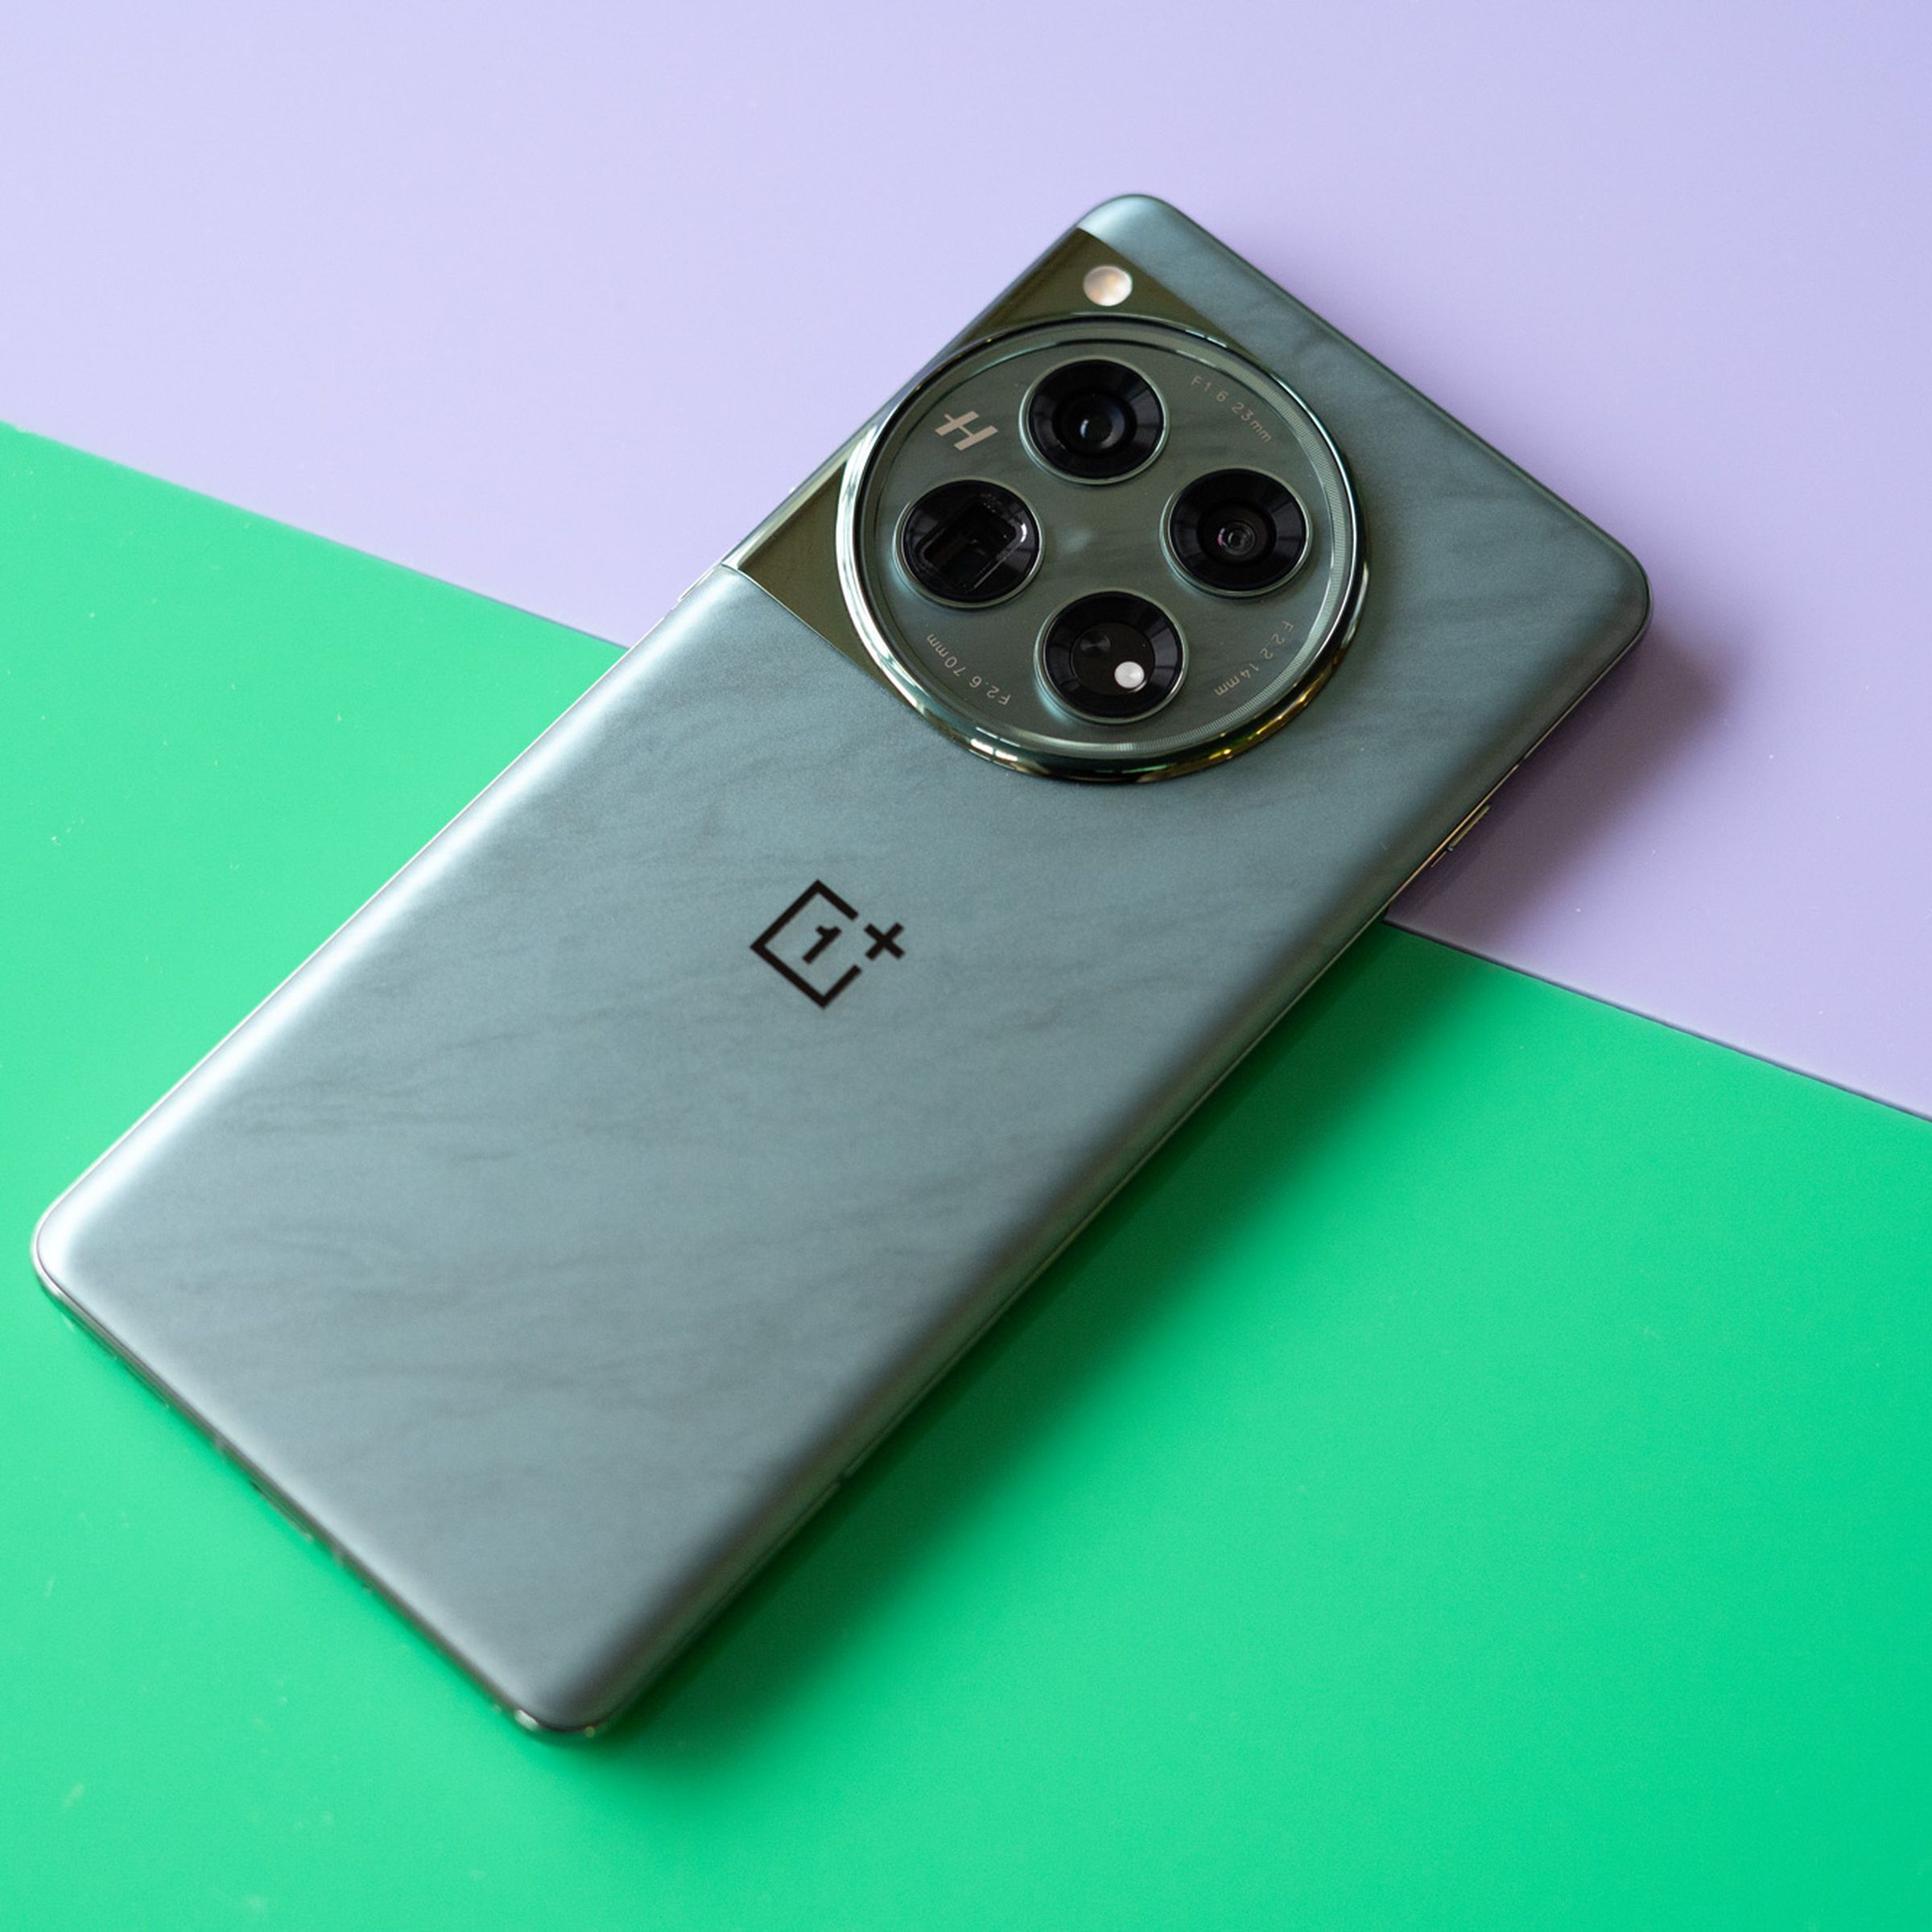 OnePlus 12 on a green and purple background showing back of the phone in marbled green color.